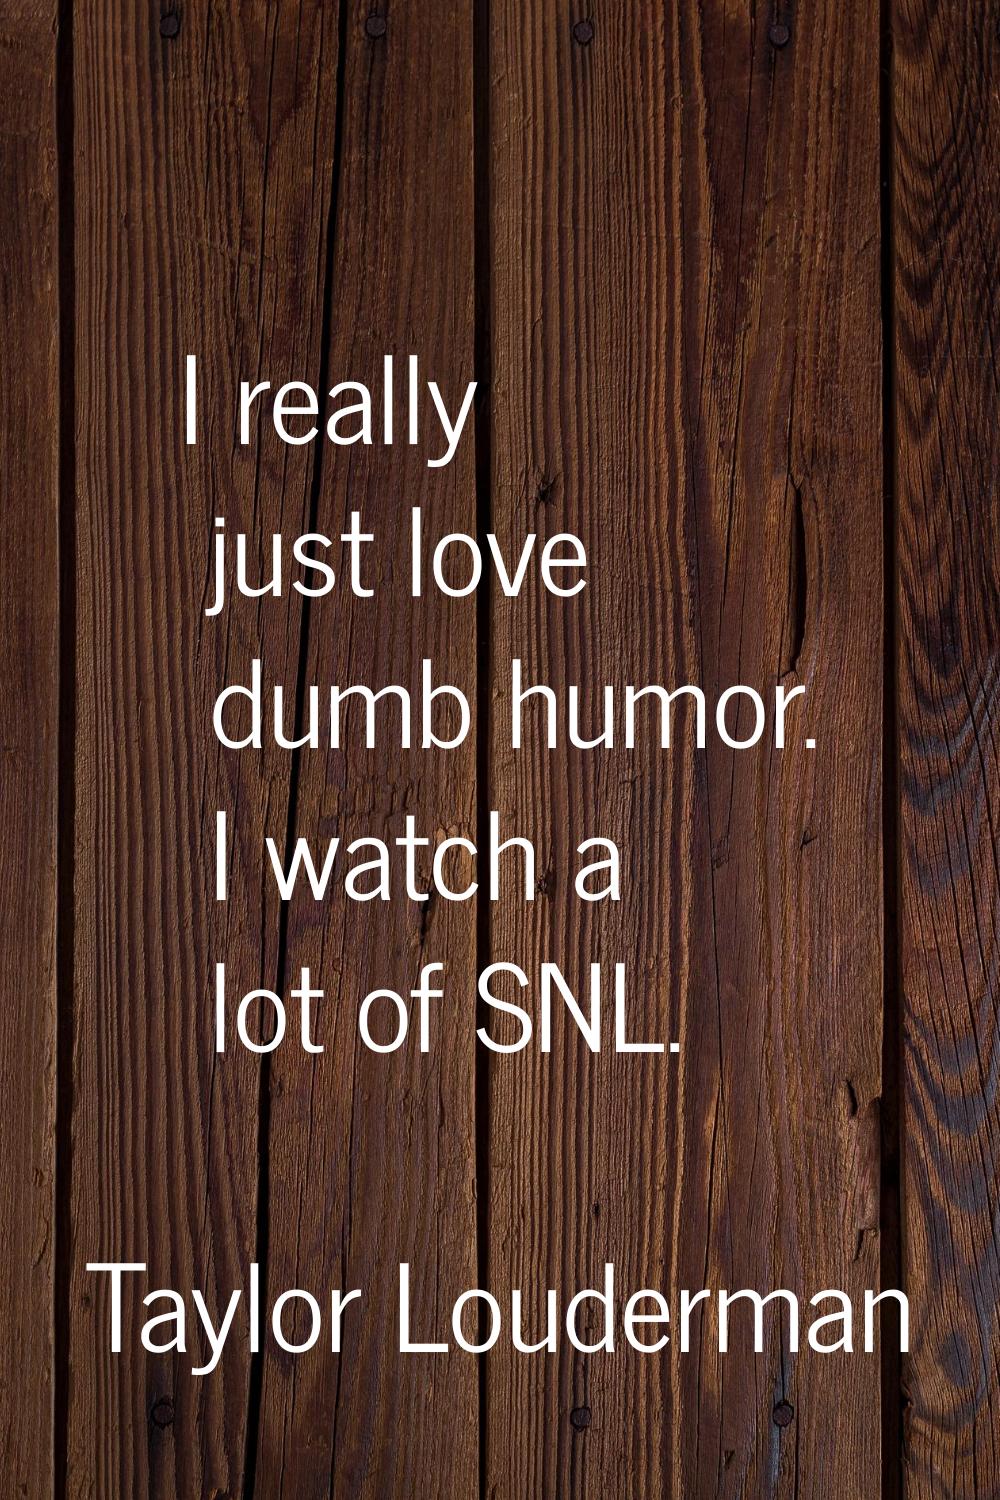 I really just love dumb humor. I watch a lot of SNL.